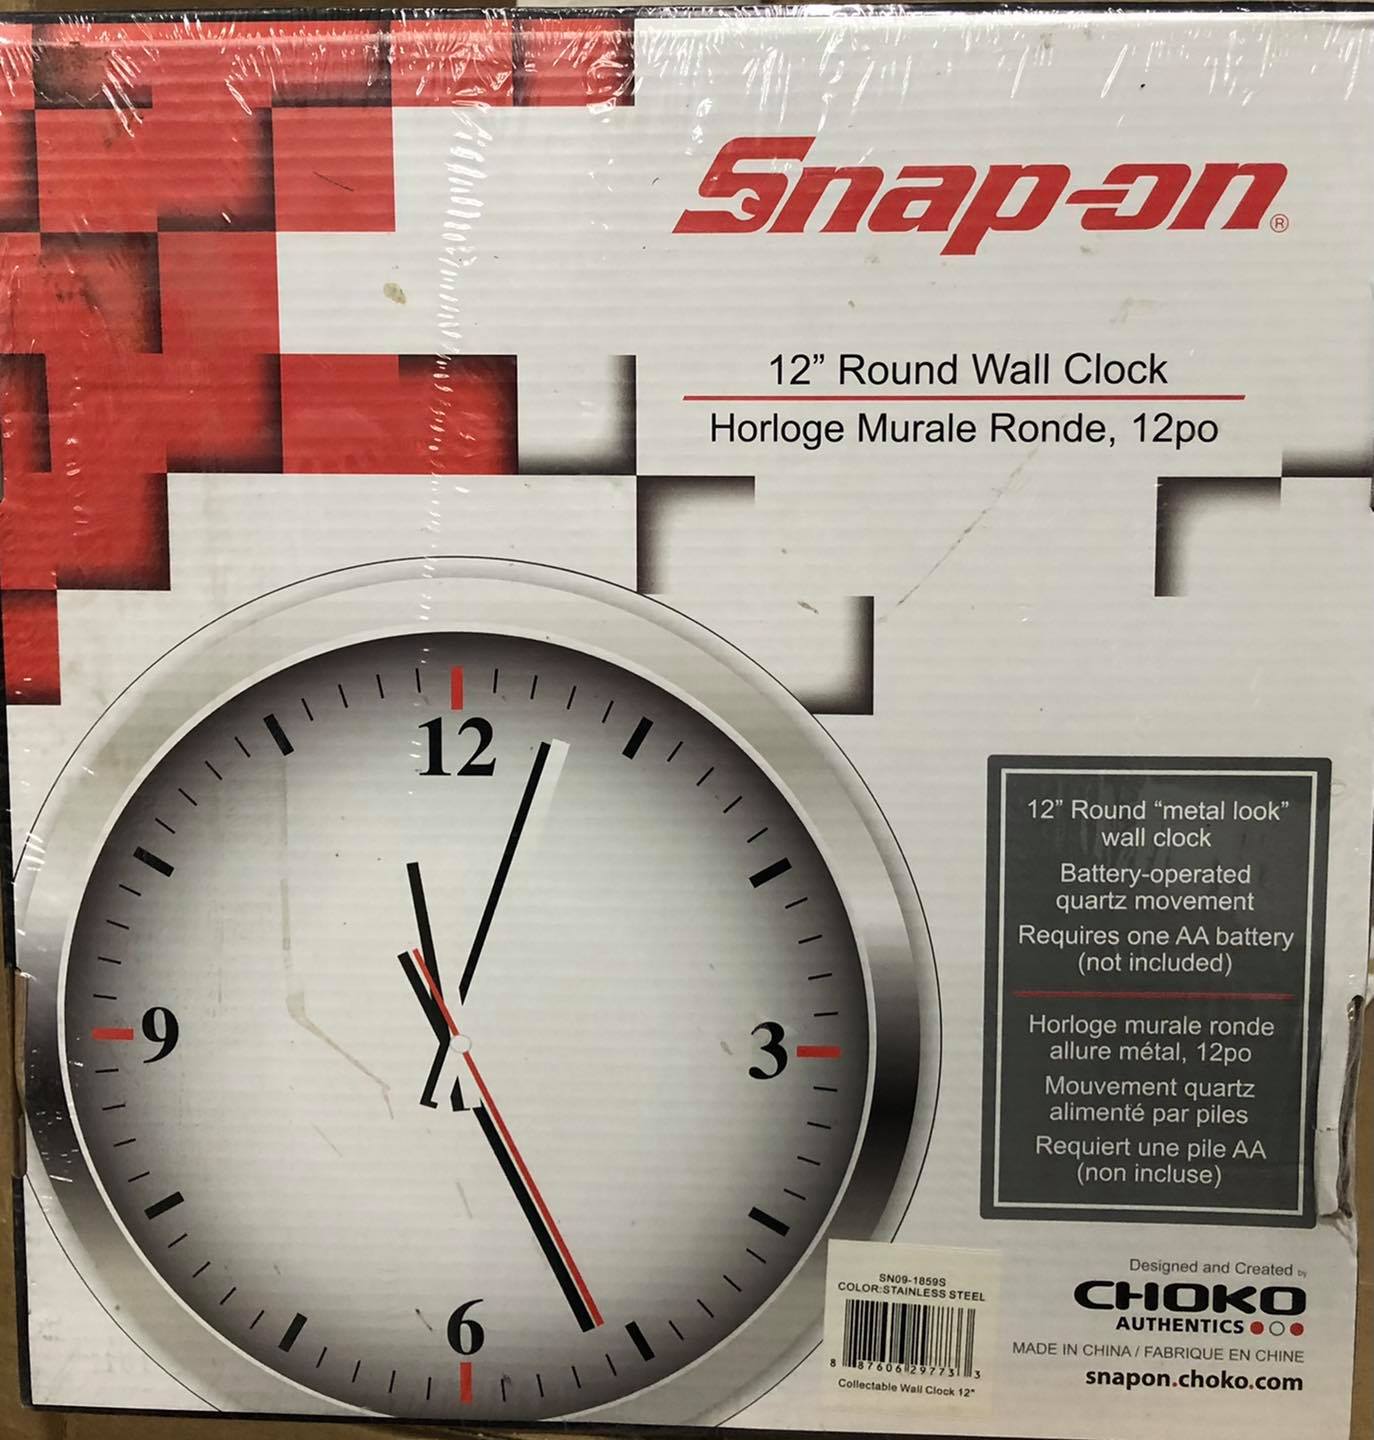 NEW Snap-on Tools 95th ANNIVERSARY 12" Round Wall Clock 